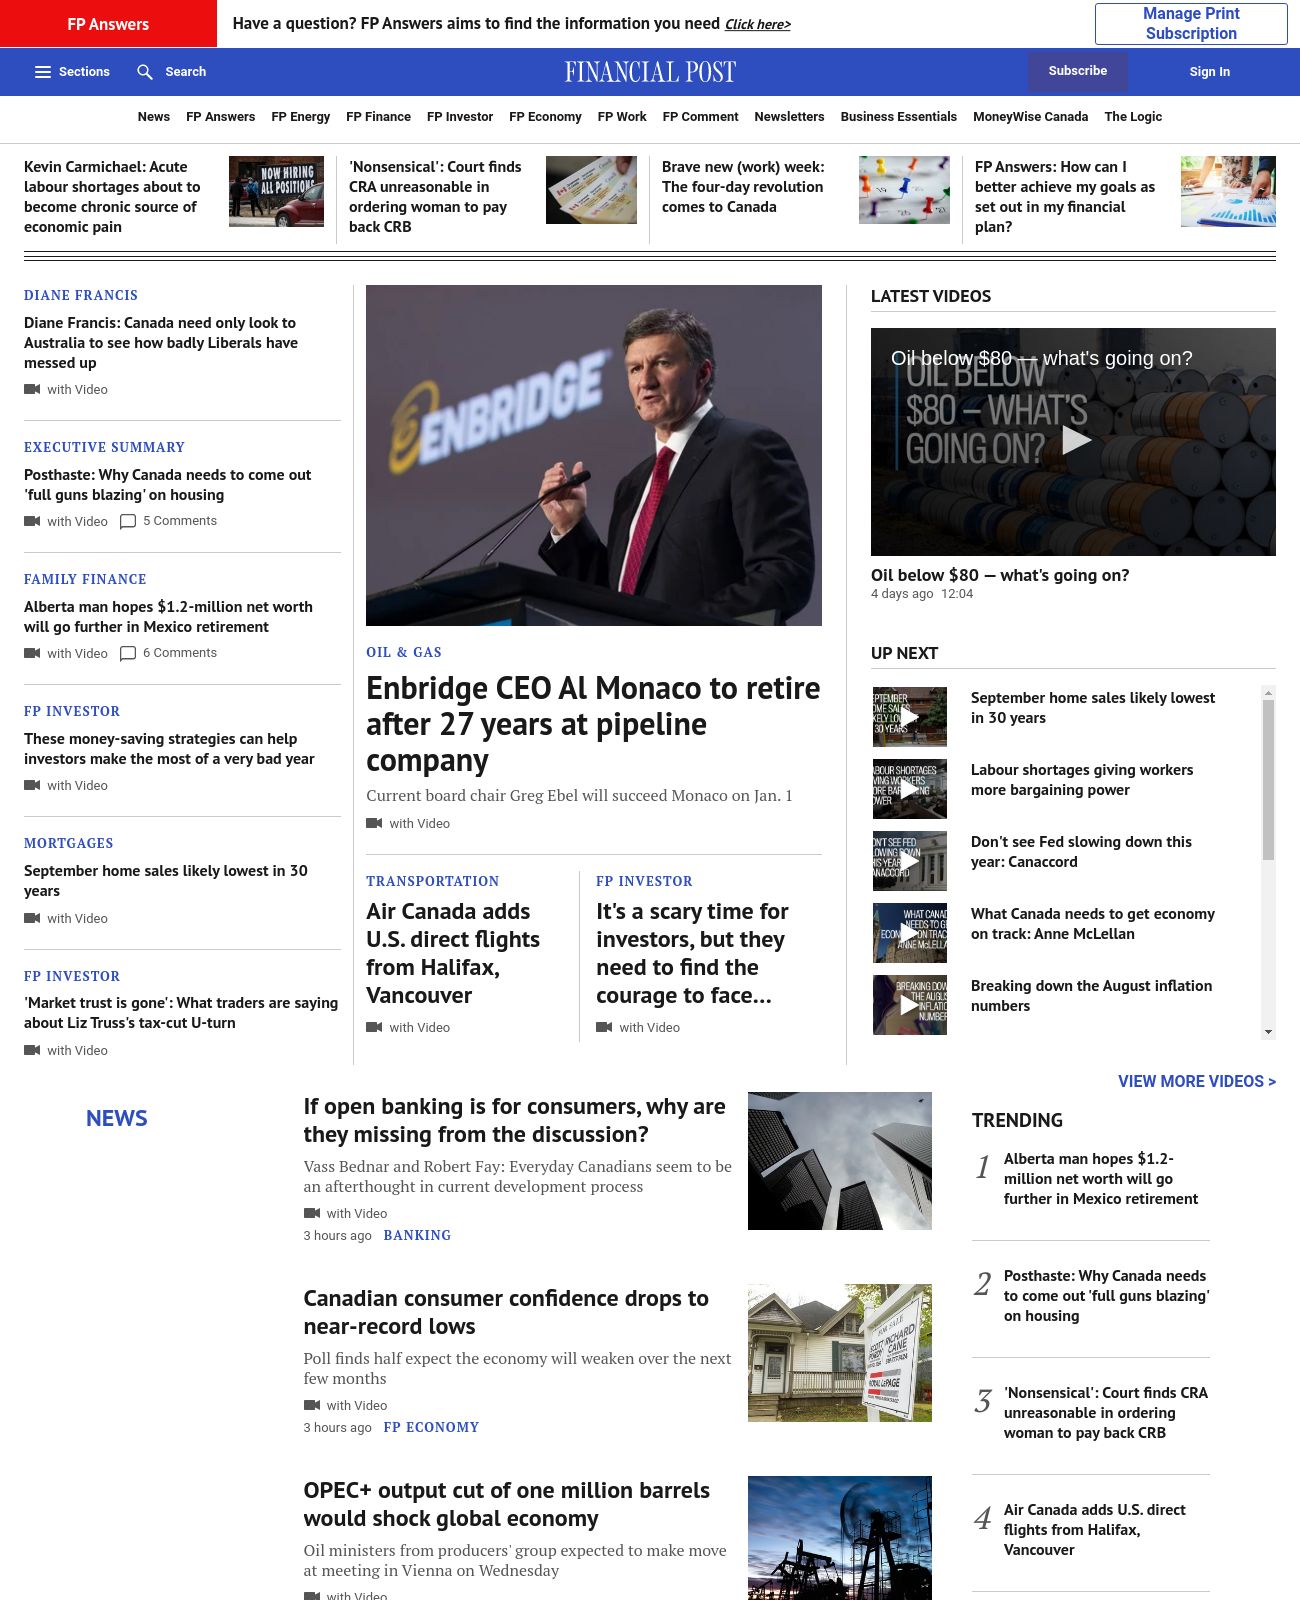 Financial Post at 2022-10-03 14:04:34-04:00 local time